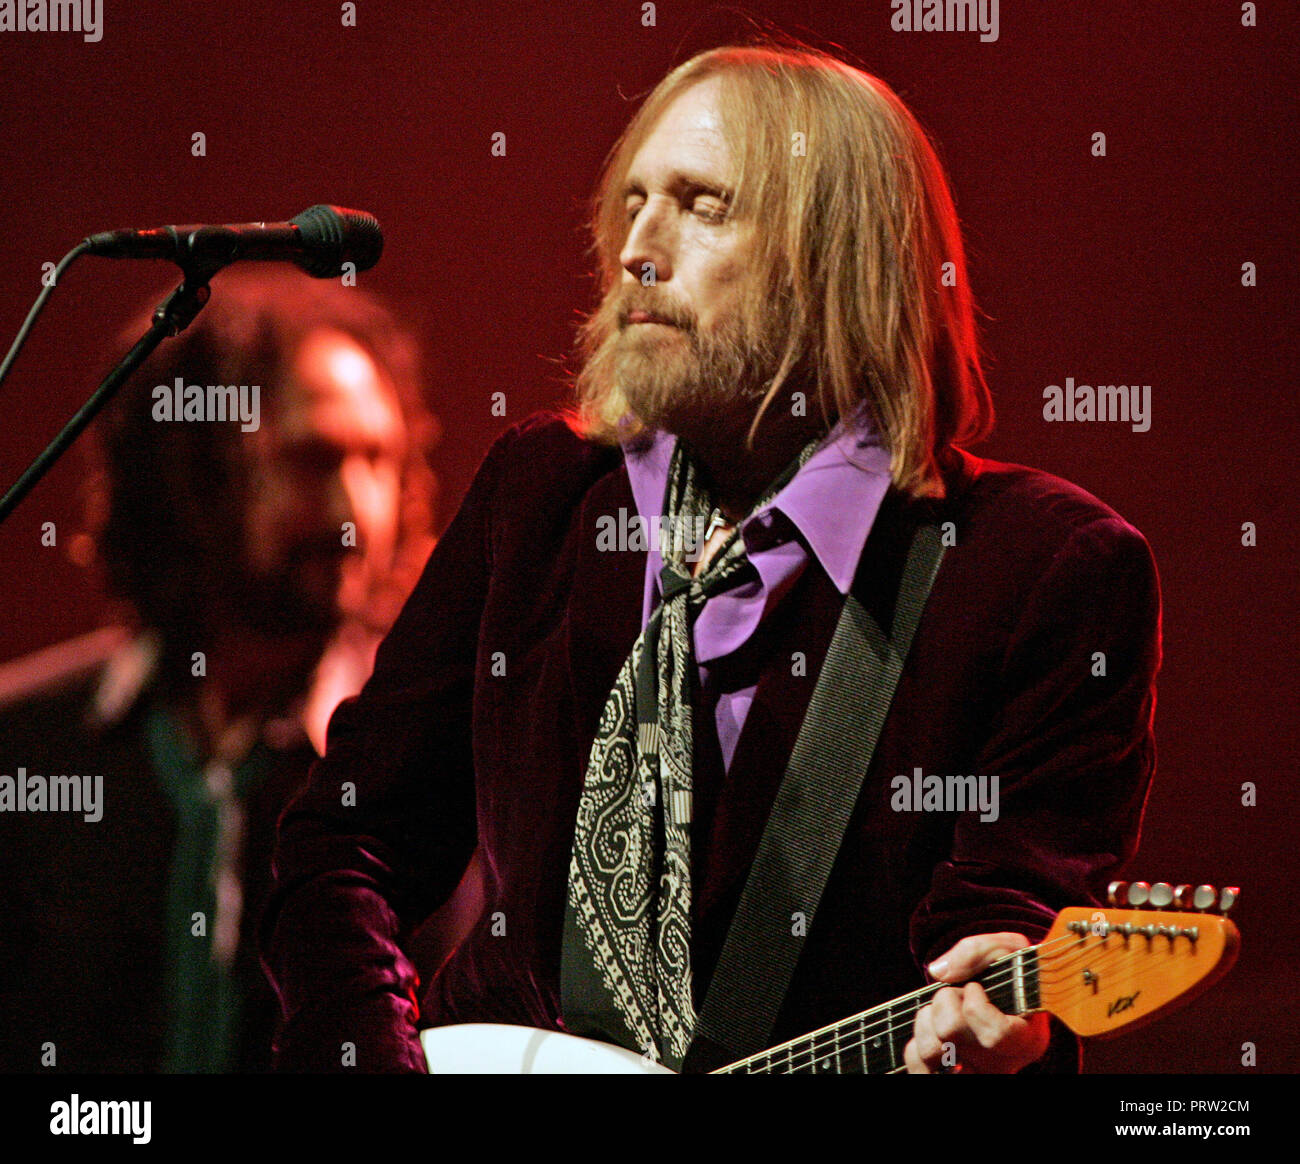 Tom Petty and the Heartbreakers perform in concert at the BankAtlantic Center in Sunrise, Florida on July 15, 2008. Stock Photo